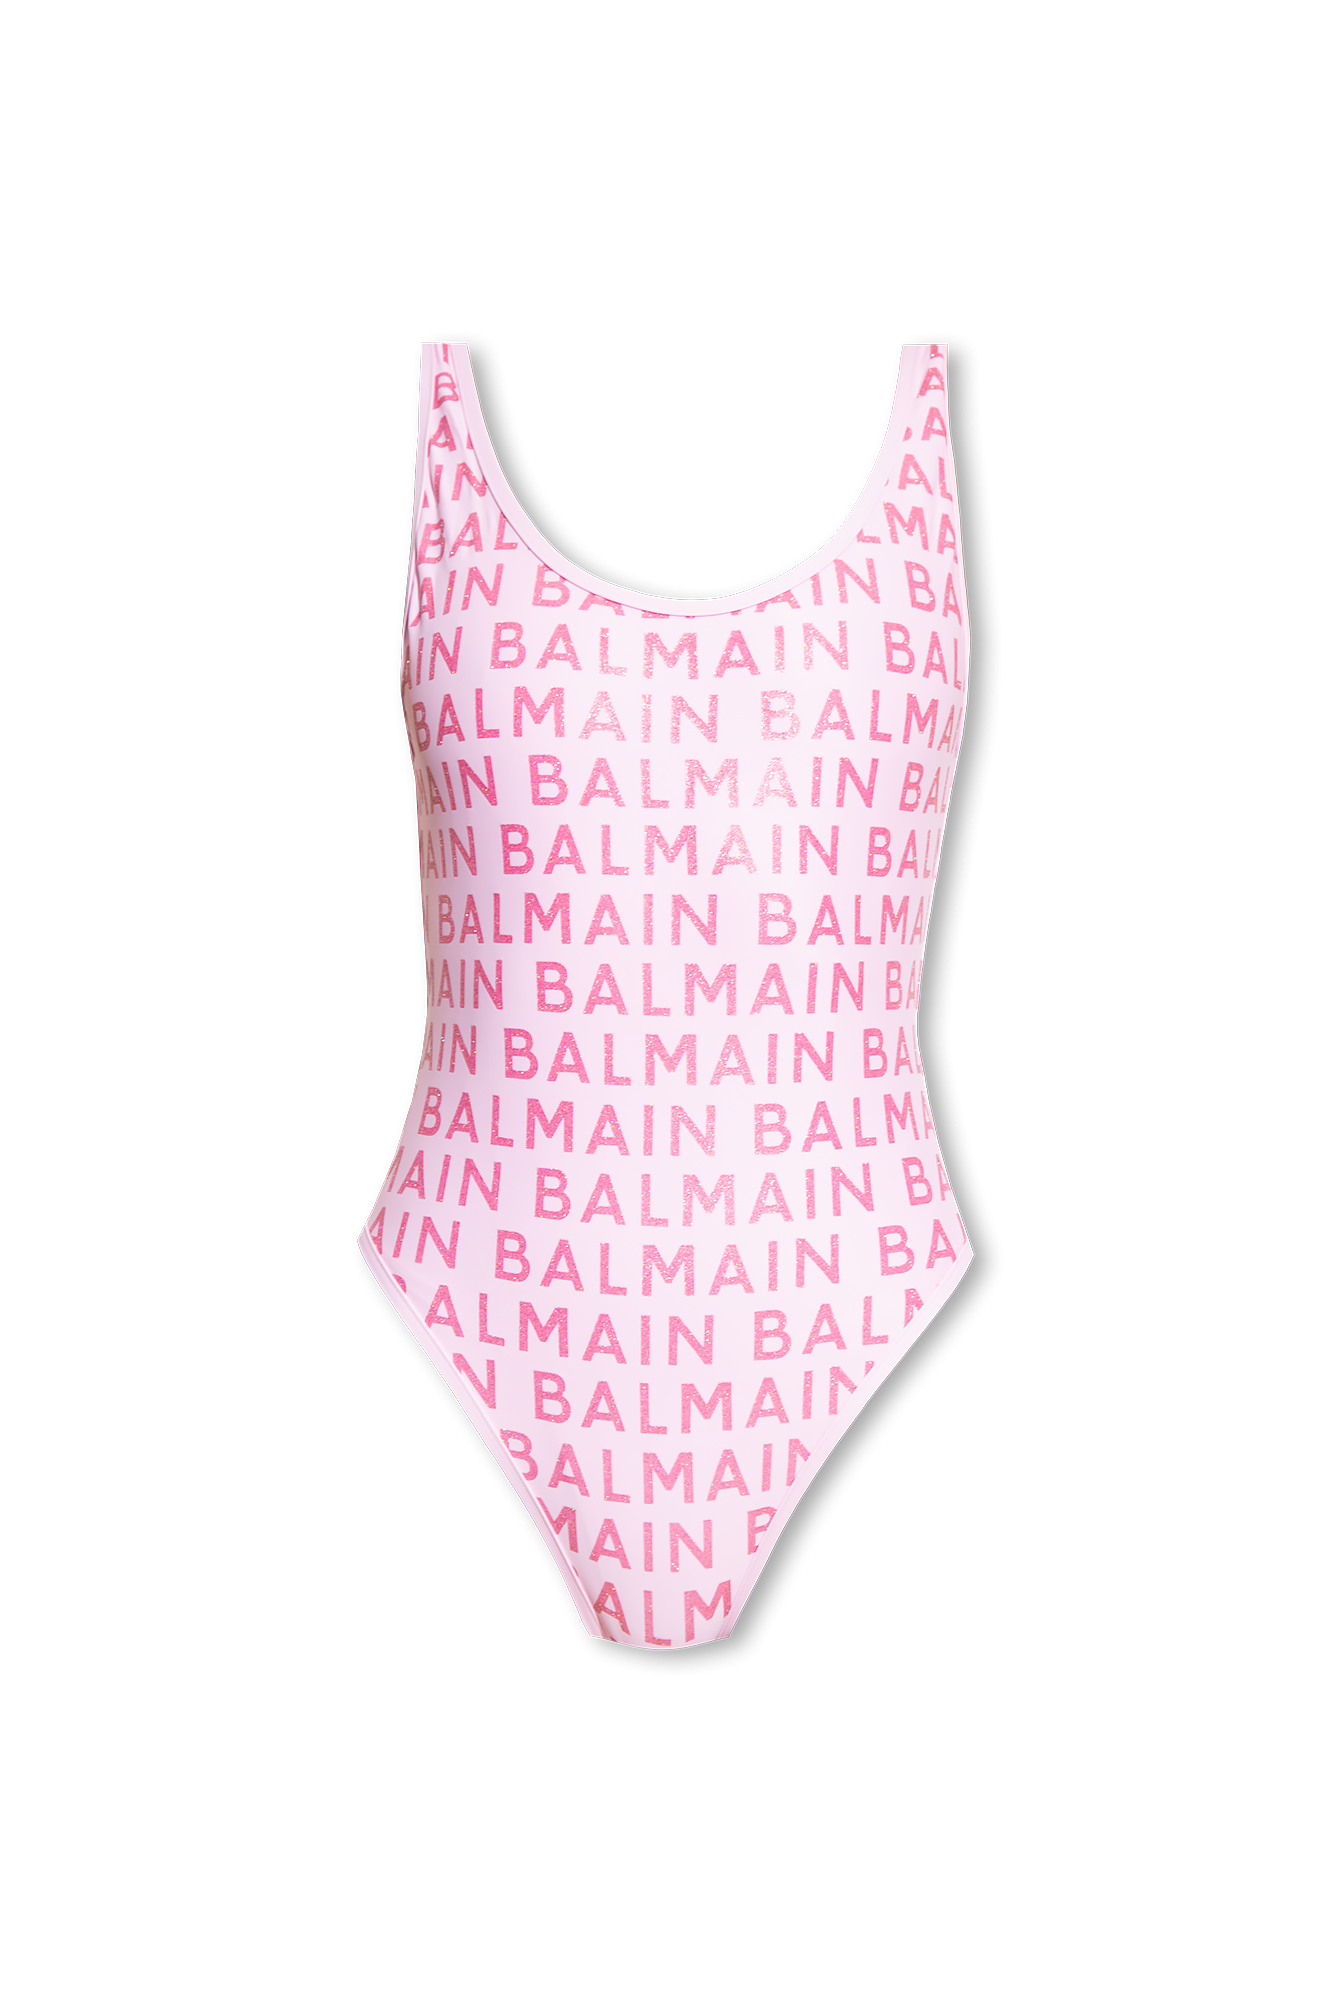 Pre-owned Louis Vuitton Two-piece Swimsuit In Pink